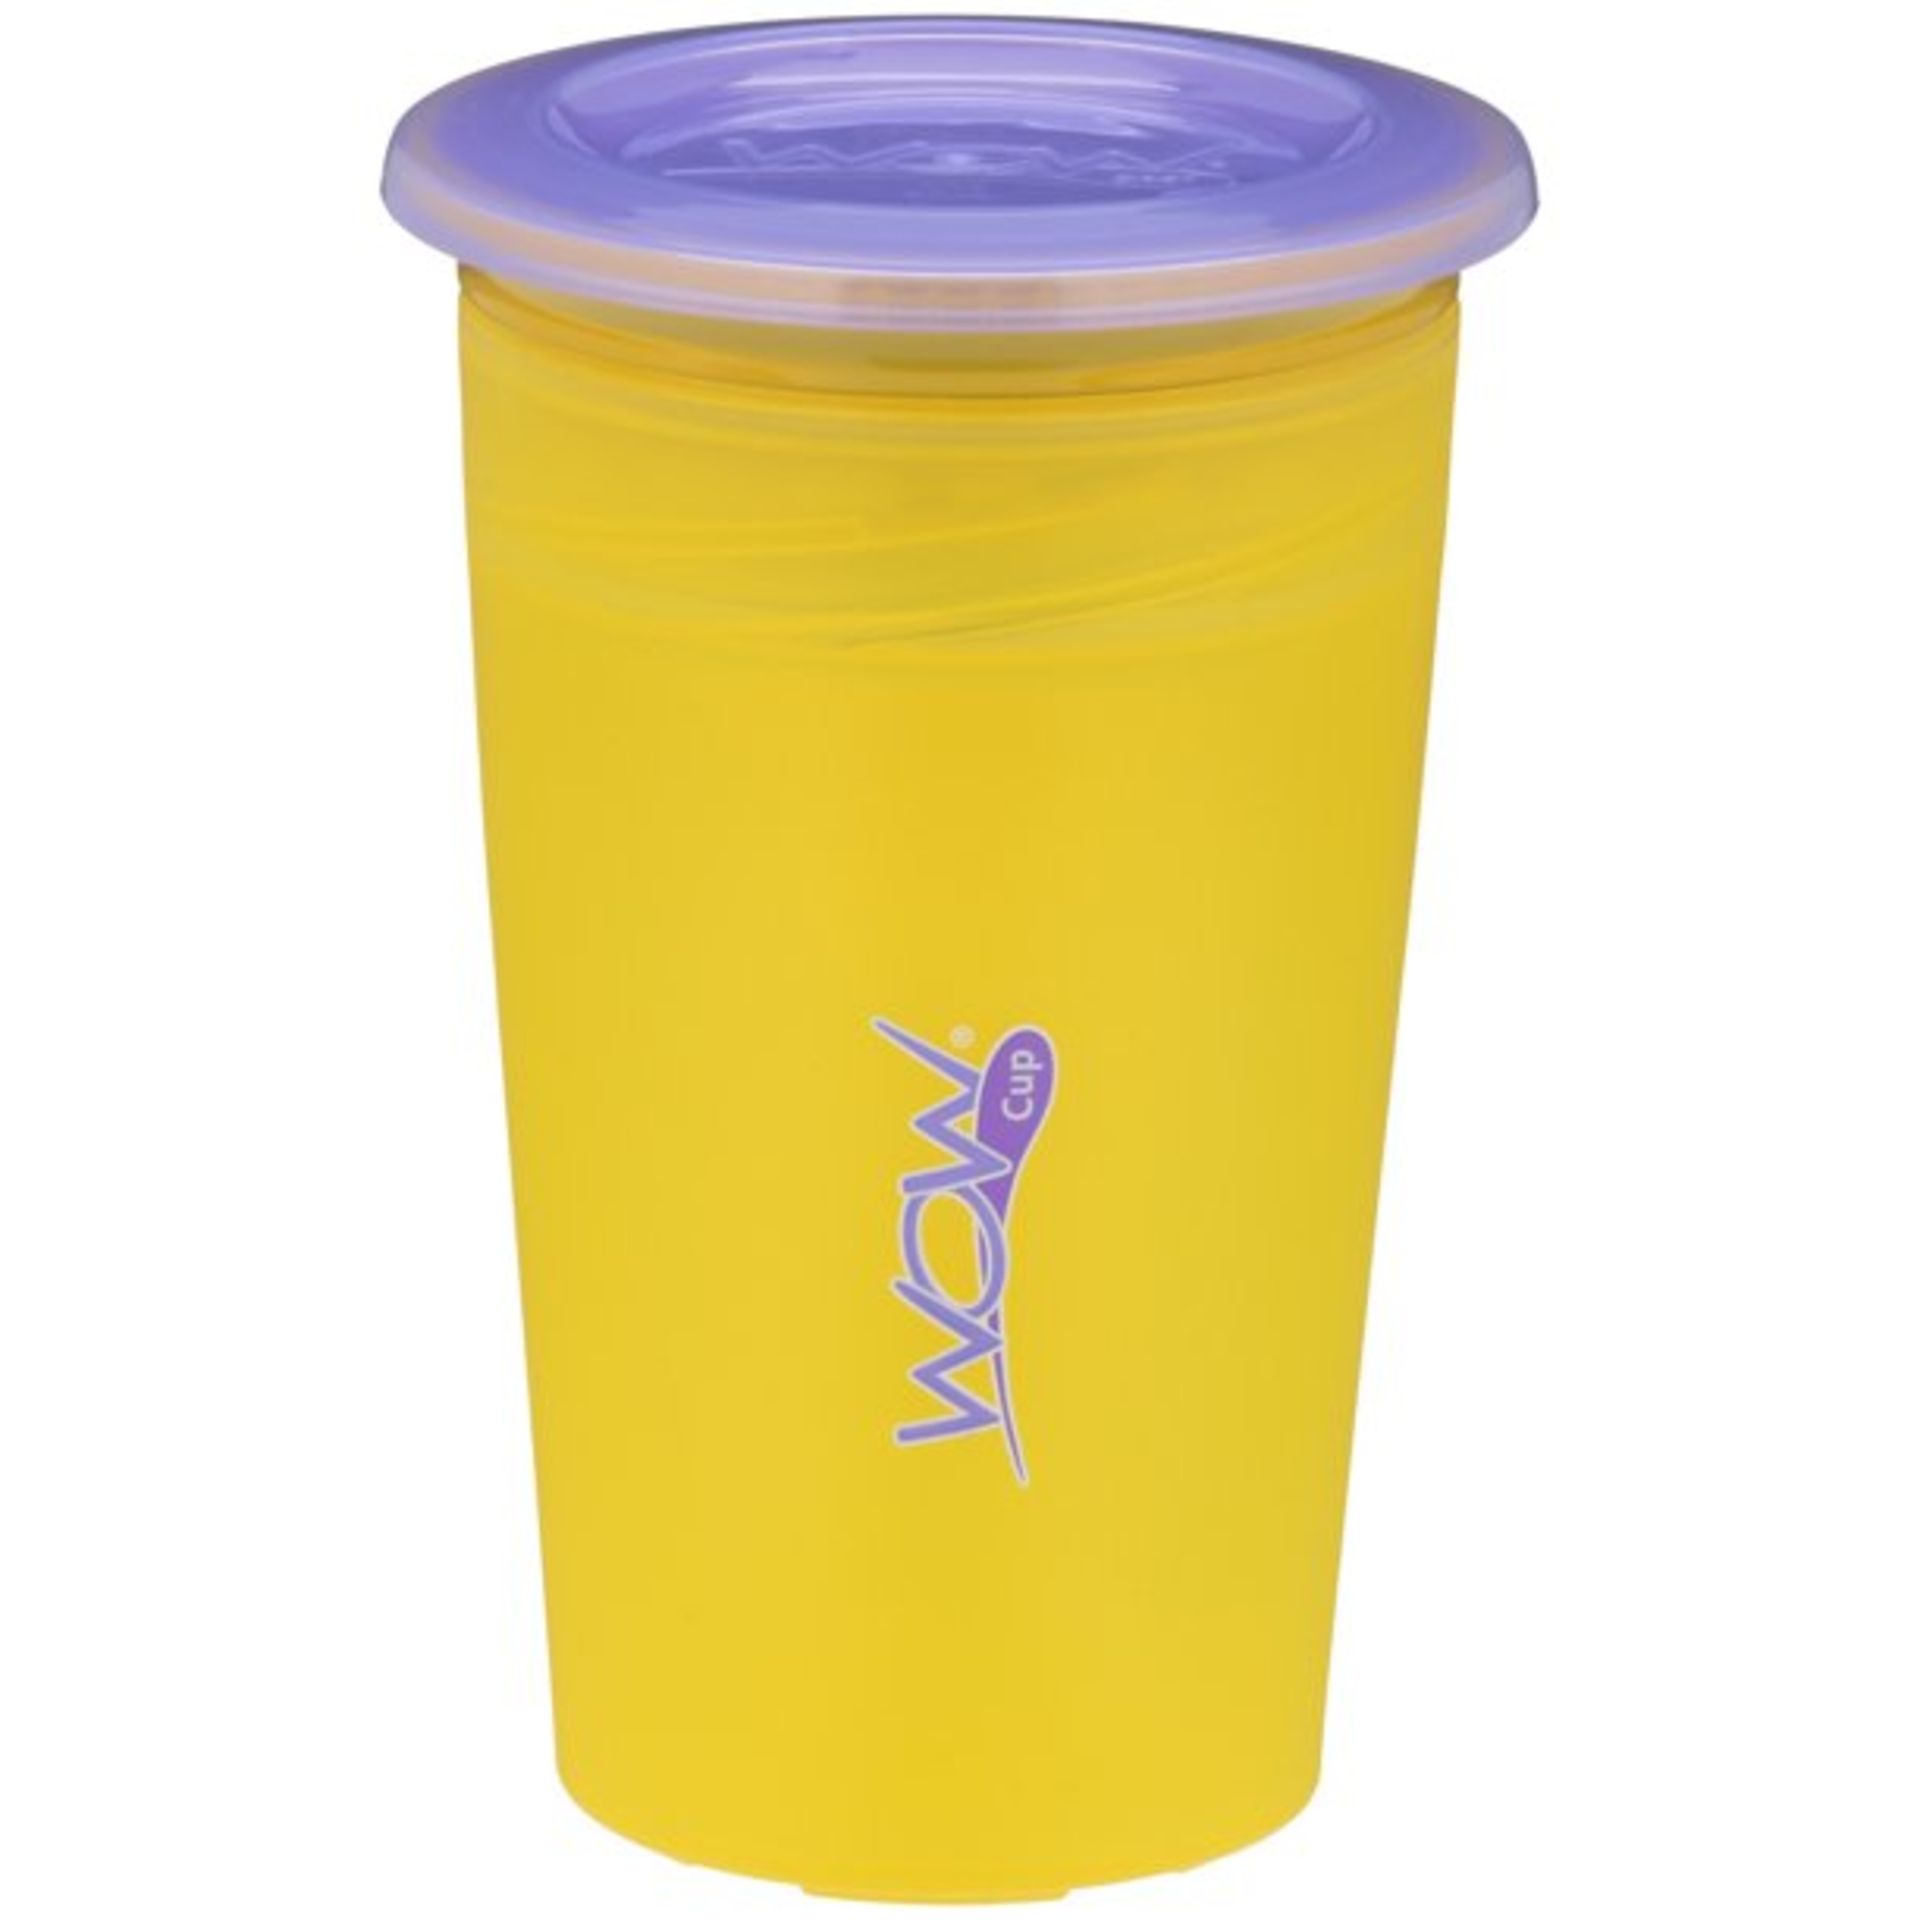 240 X SPILL FREE DRINKING CUP FOR KIDS -WOW INNOVATIVE DIFFERENT COLORS - RRP £1680 - Image 7 of 8